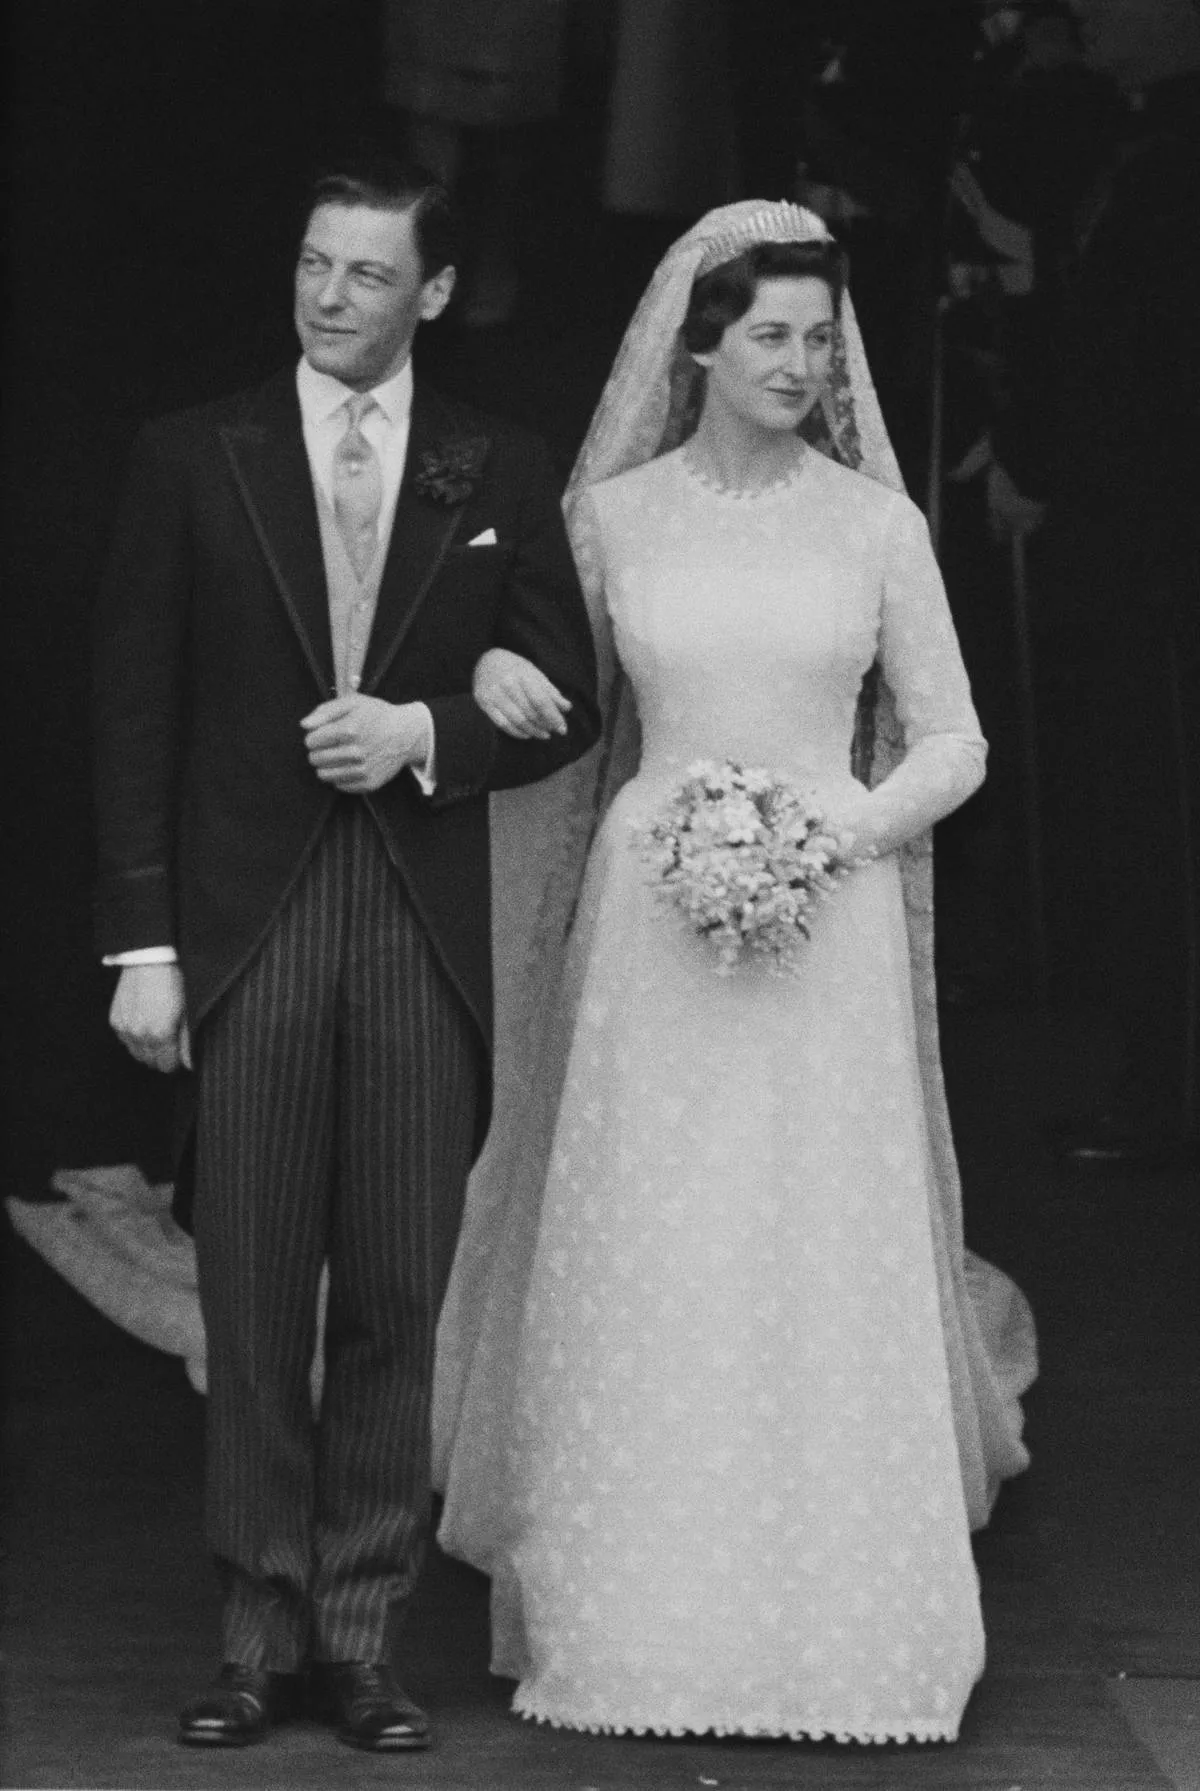 <p>On April 24, 1963, Princess Alexandra of Kent was married to Angus James Ogilvy at Westminster Abbey. She is a first cousin of Queen Elizabeth.</p> <p>For the occasion, Alexandra wore <a href="https://www.thecourtjeweller.com/2019/05/the-kent-city-of-london-fringe-tiara.html" rel="noopener noreferrer">The Kent City of London diamond fringe tiara</a>, which features diamonds that are set in both gold and silver. The jewelry had belonged to her mother, Princess Marina, who had a similar style for her own wedding. We'll see her bridal ensemble later.</p> <p><a href="https://www.msn.com/en-us/community/channel/vid-u7q3kmpdkkkxhftb08rpv9p5r4sxwvipuqisdevjrvyf4v9cfj9s?item=flights%3Aprg-tipsubsc-v1a&ocid=windirect&cvid=1421b7fe40e24eb3b4cd0fb4d74b5e2c" rel="noopener noreferrer">Follow our brand to see more like this</a></p>